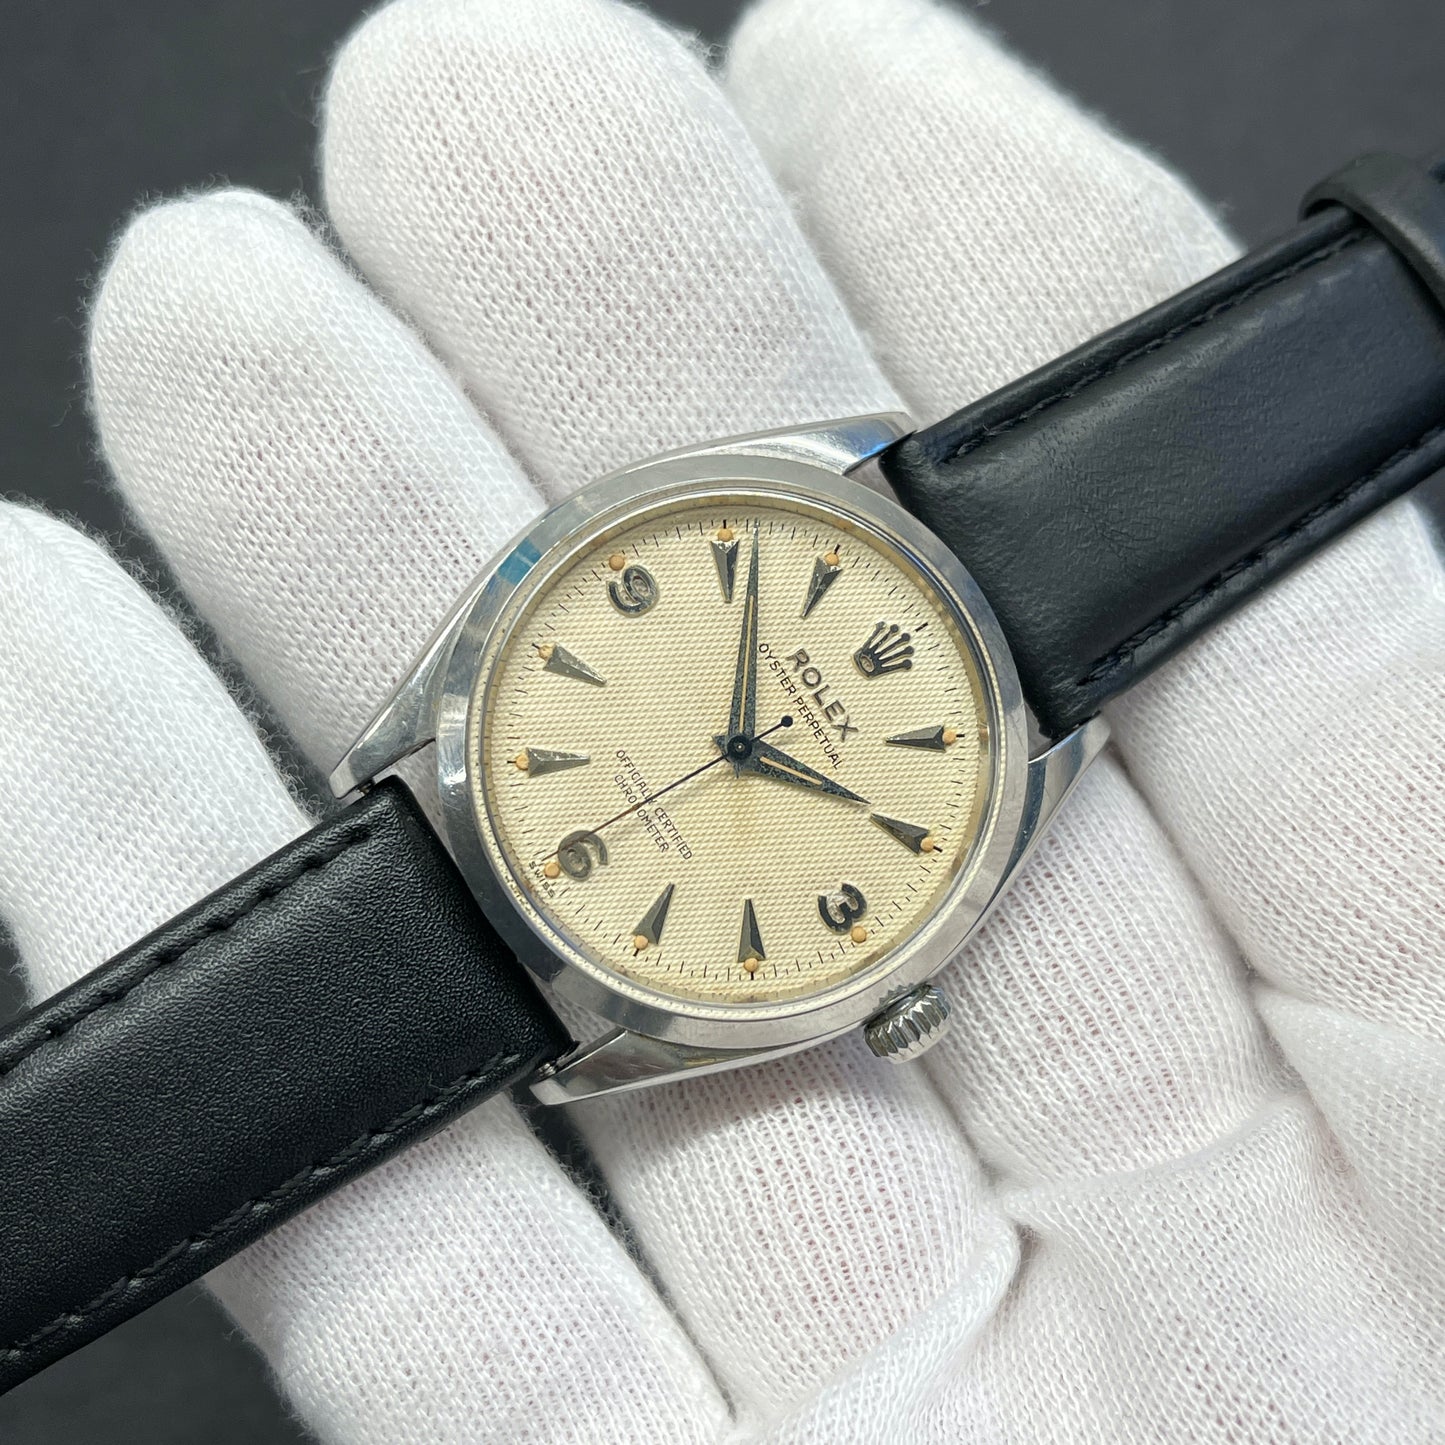 PENDING SALE * 1956 Vintage Rolex Oyster Perpetual 6564 Waffle Dial Automatic Wristwatch - Hashtag Watch Company